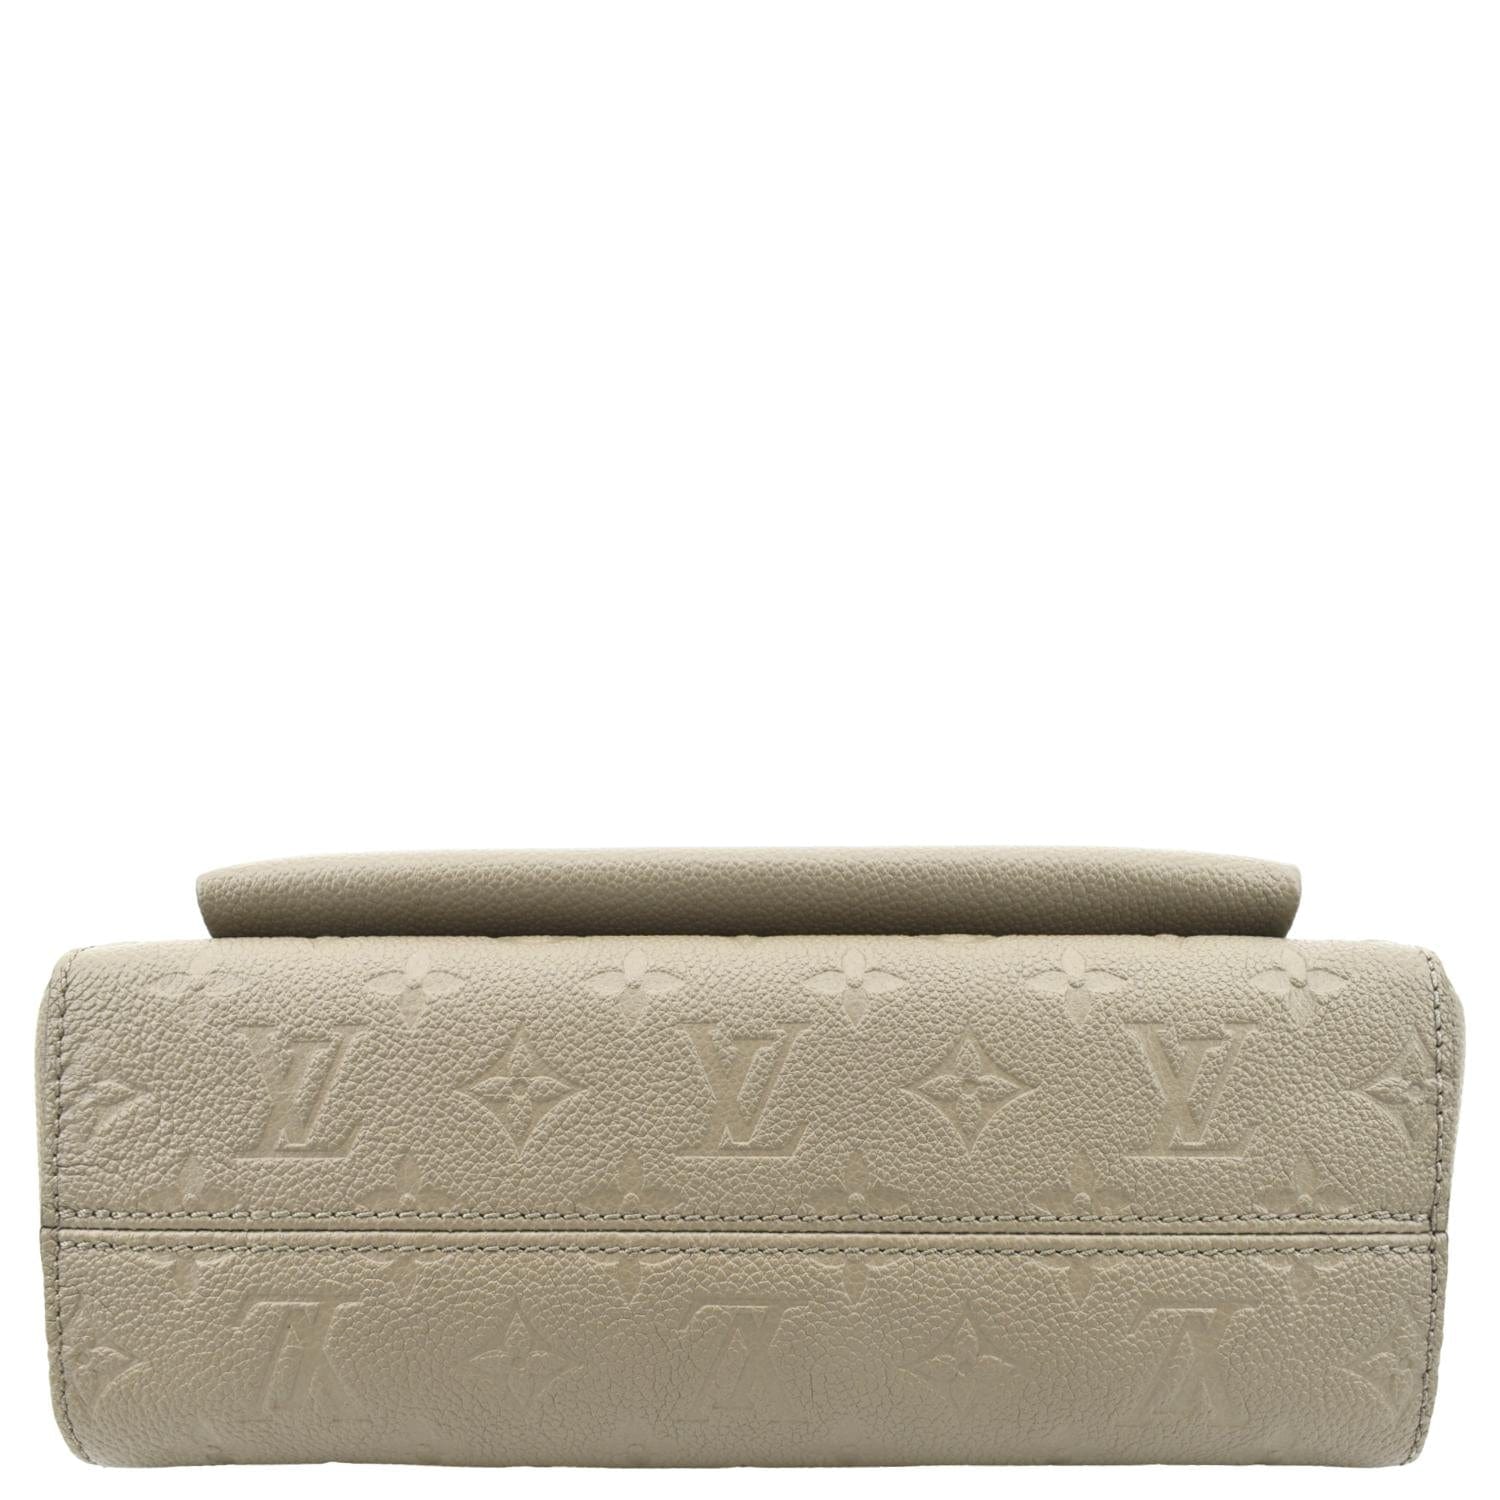 Vavin leather crossbody bag Louis Vuitton Beige in Leather - 37385788